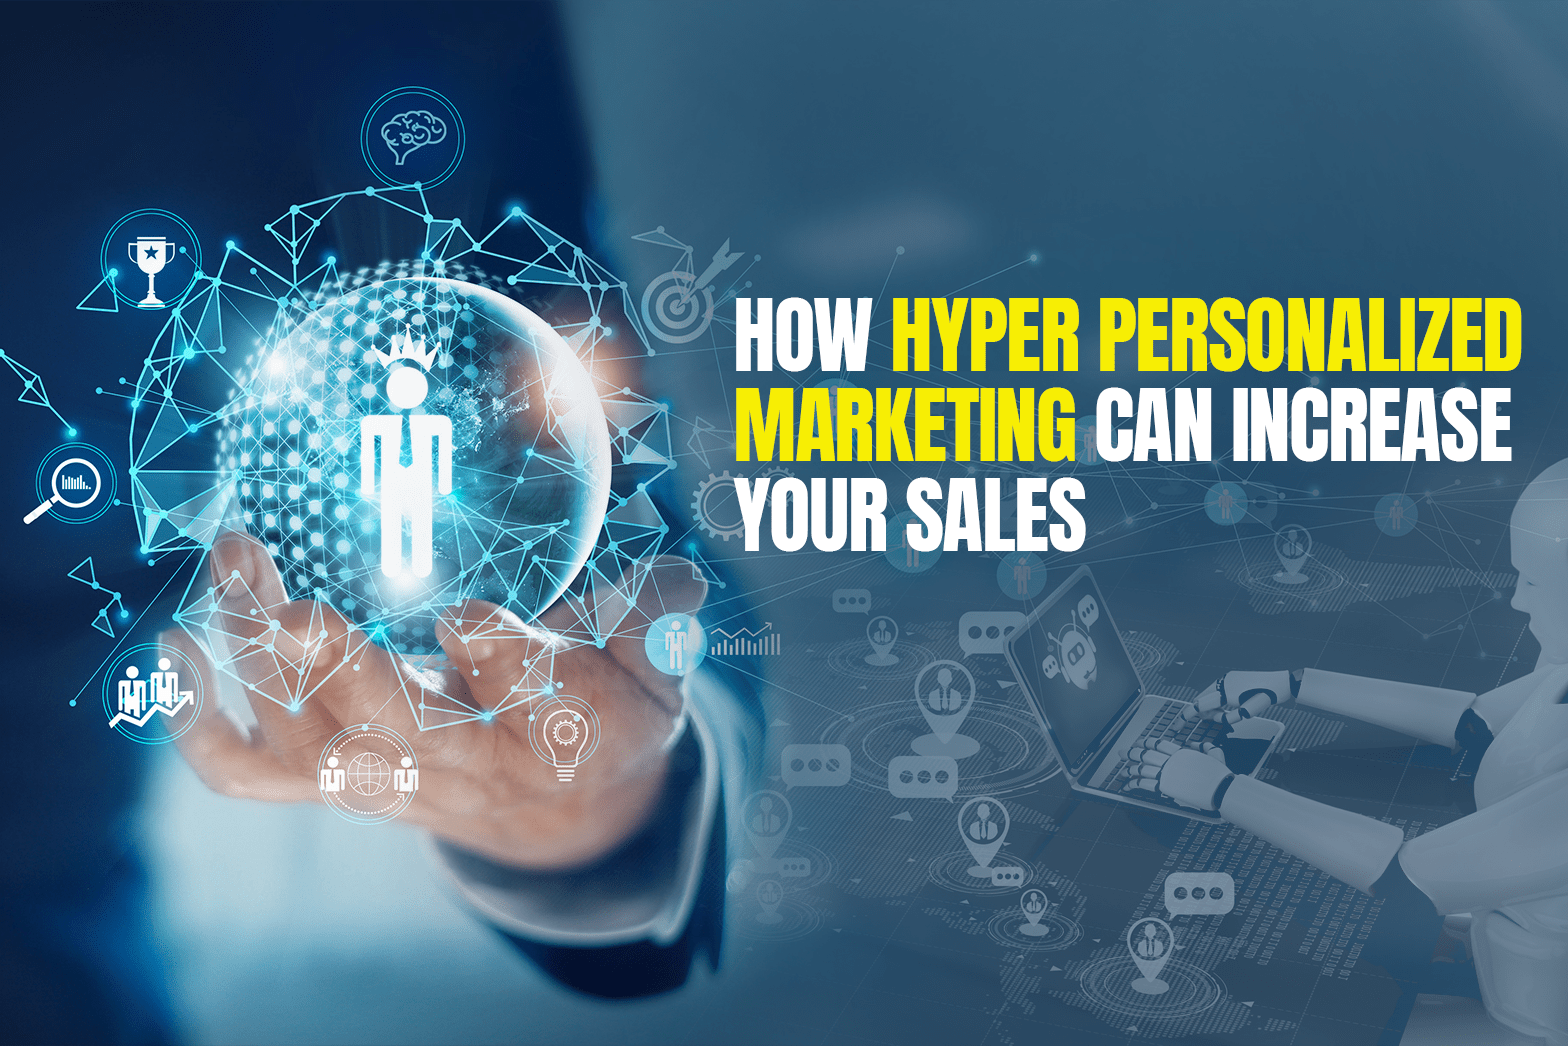 How Hyper Personalized Marketing Can Increase Your Sales